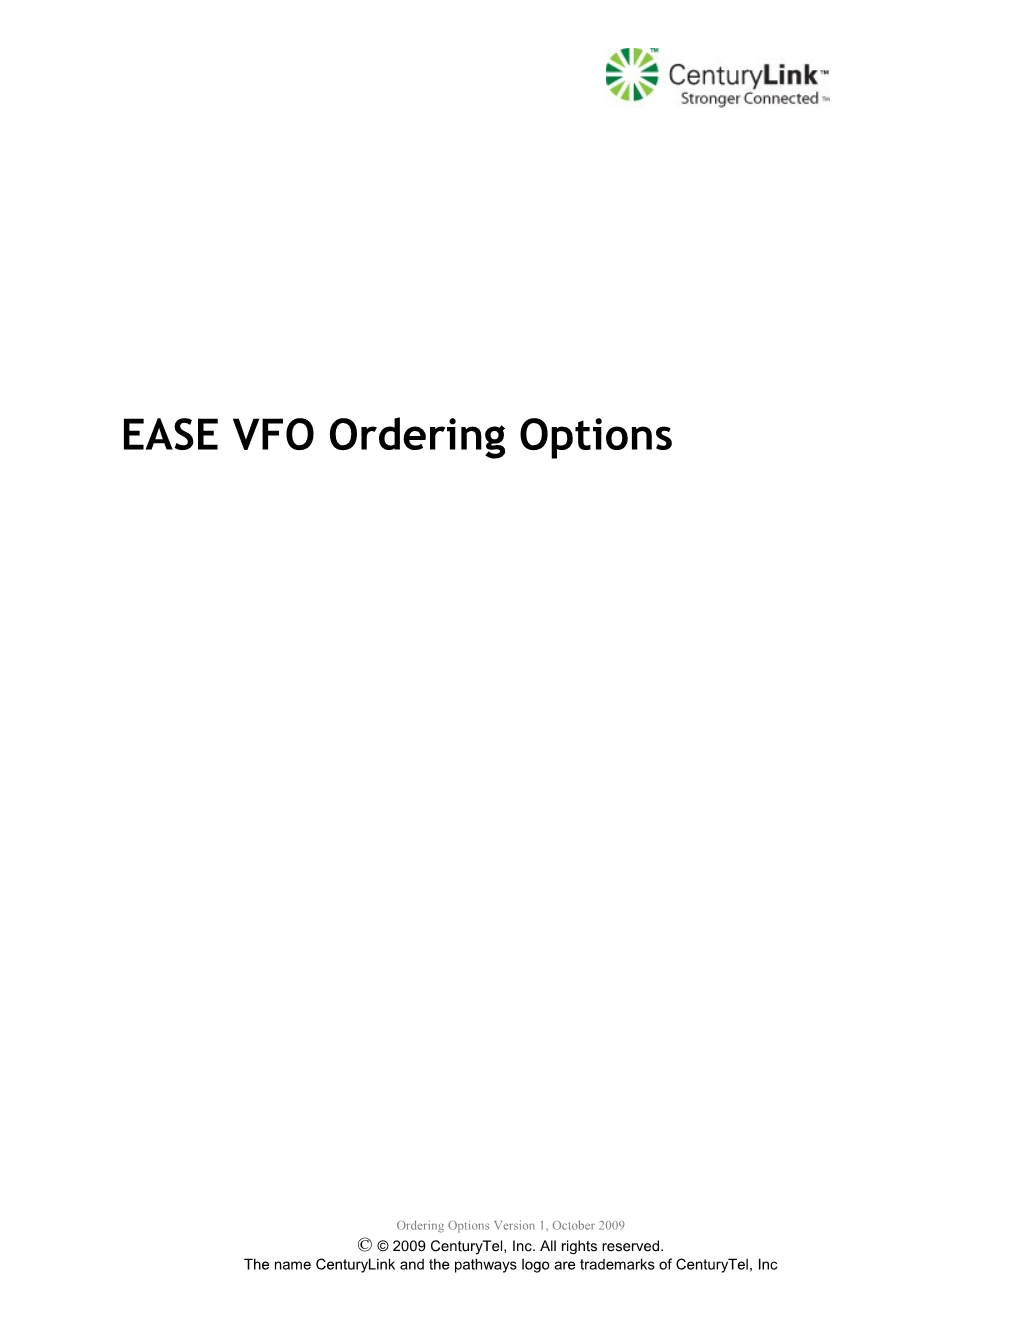 EASE VFO Ordering Options